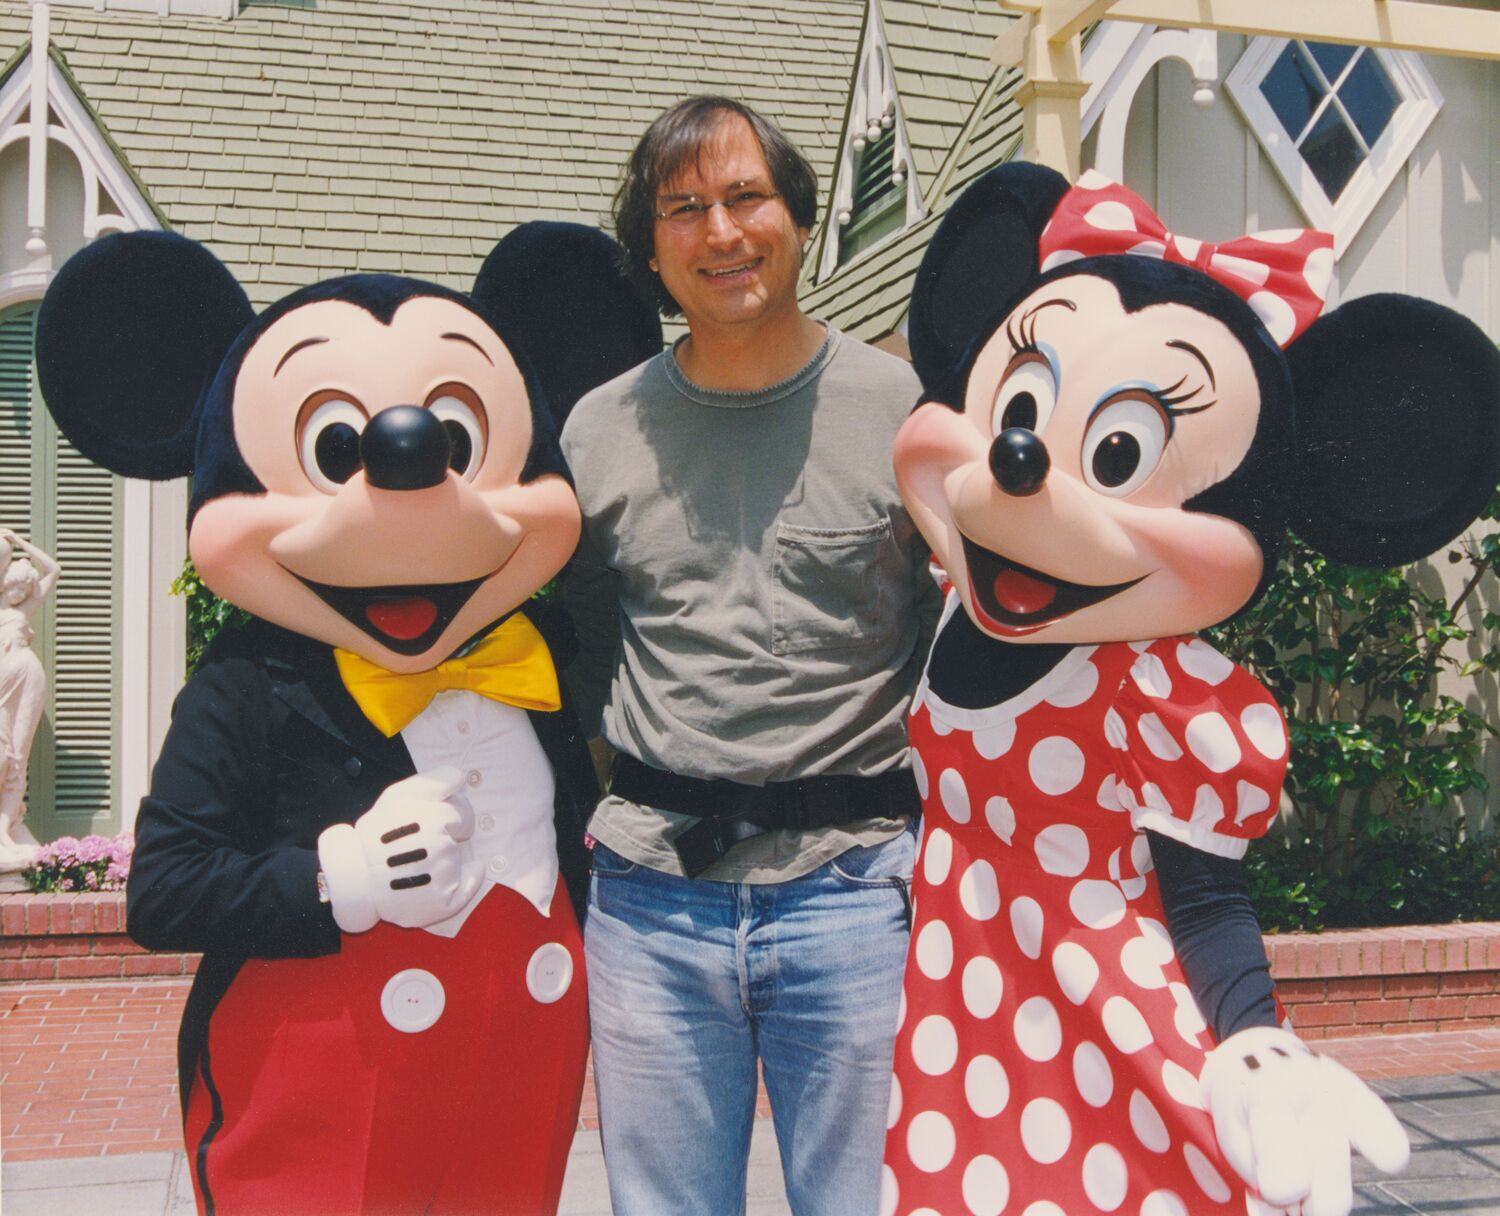 Steve, smiling, poses with Mickey and Minnie Mouse at Disneyland.